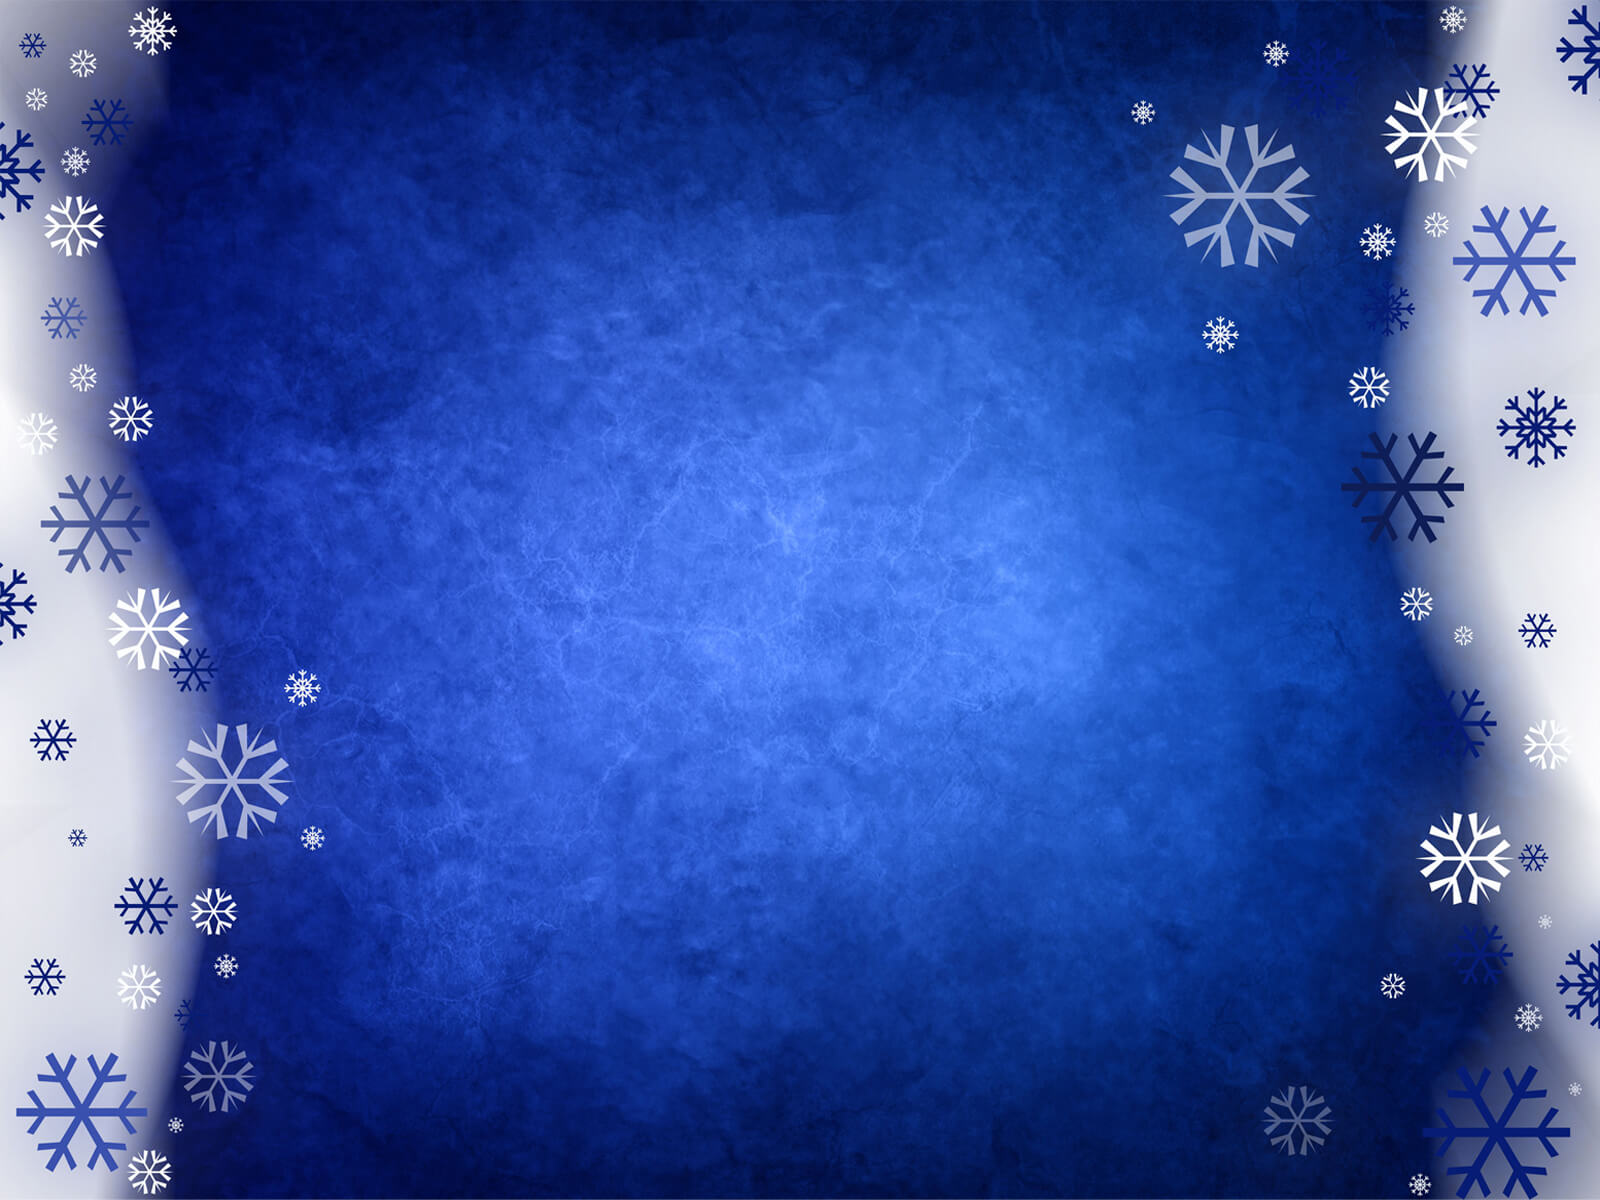 Snowy Blue Abstract Powerpoint Templates – Blue, Christmas In Snow Powerpoint Template